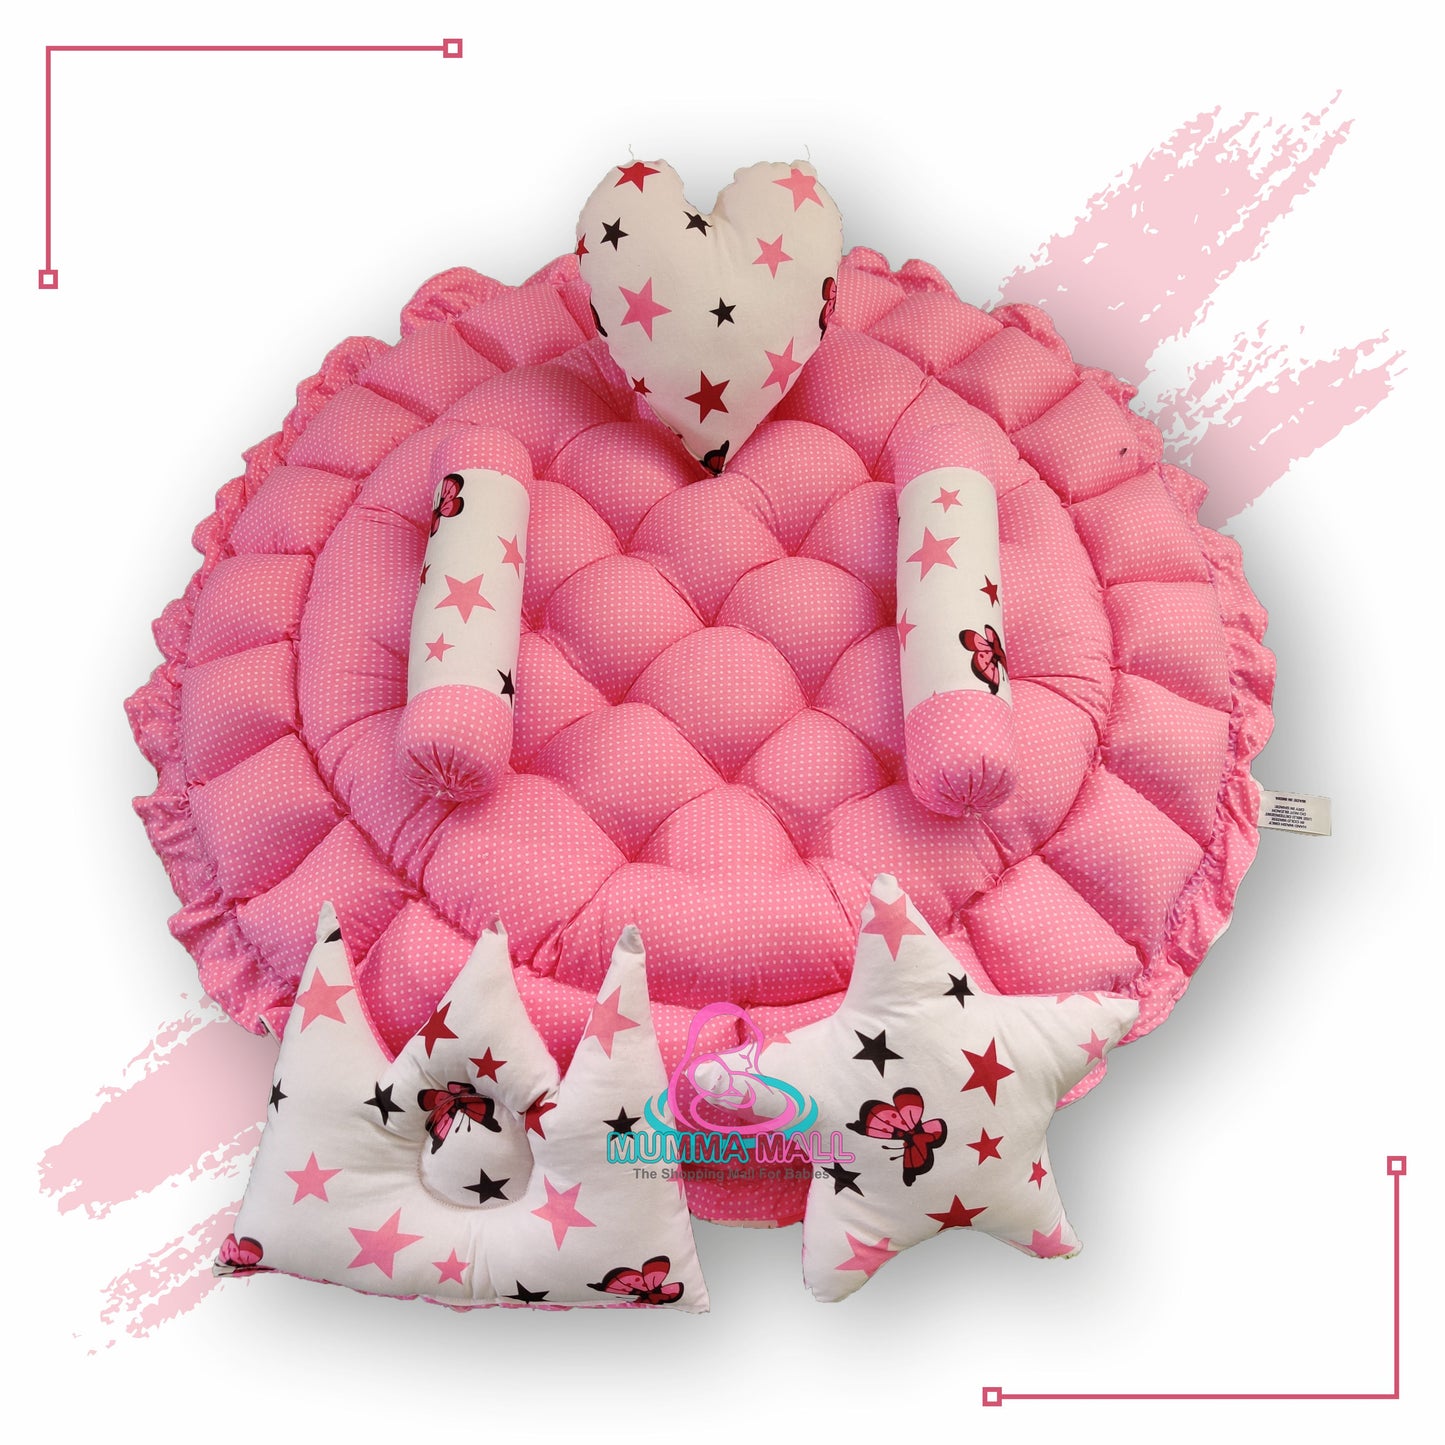 Round baby tub bed with set of 5 pillows as neck support, side support and toy (Pink and White)